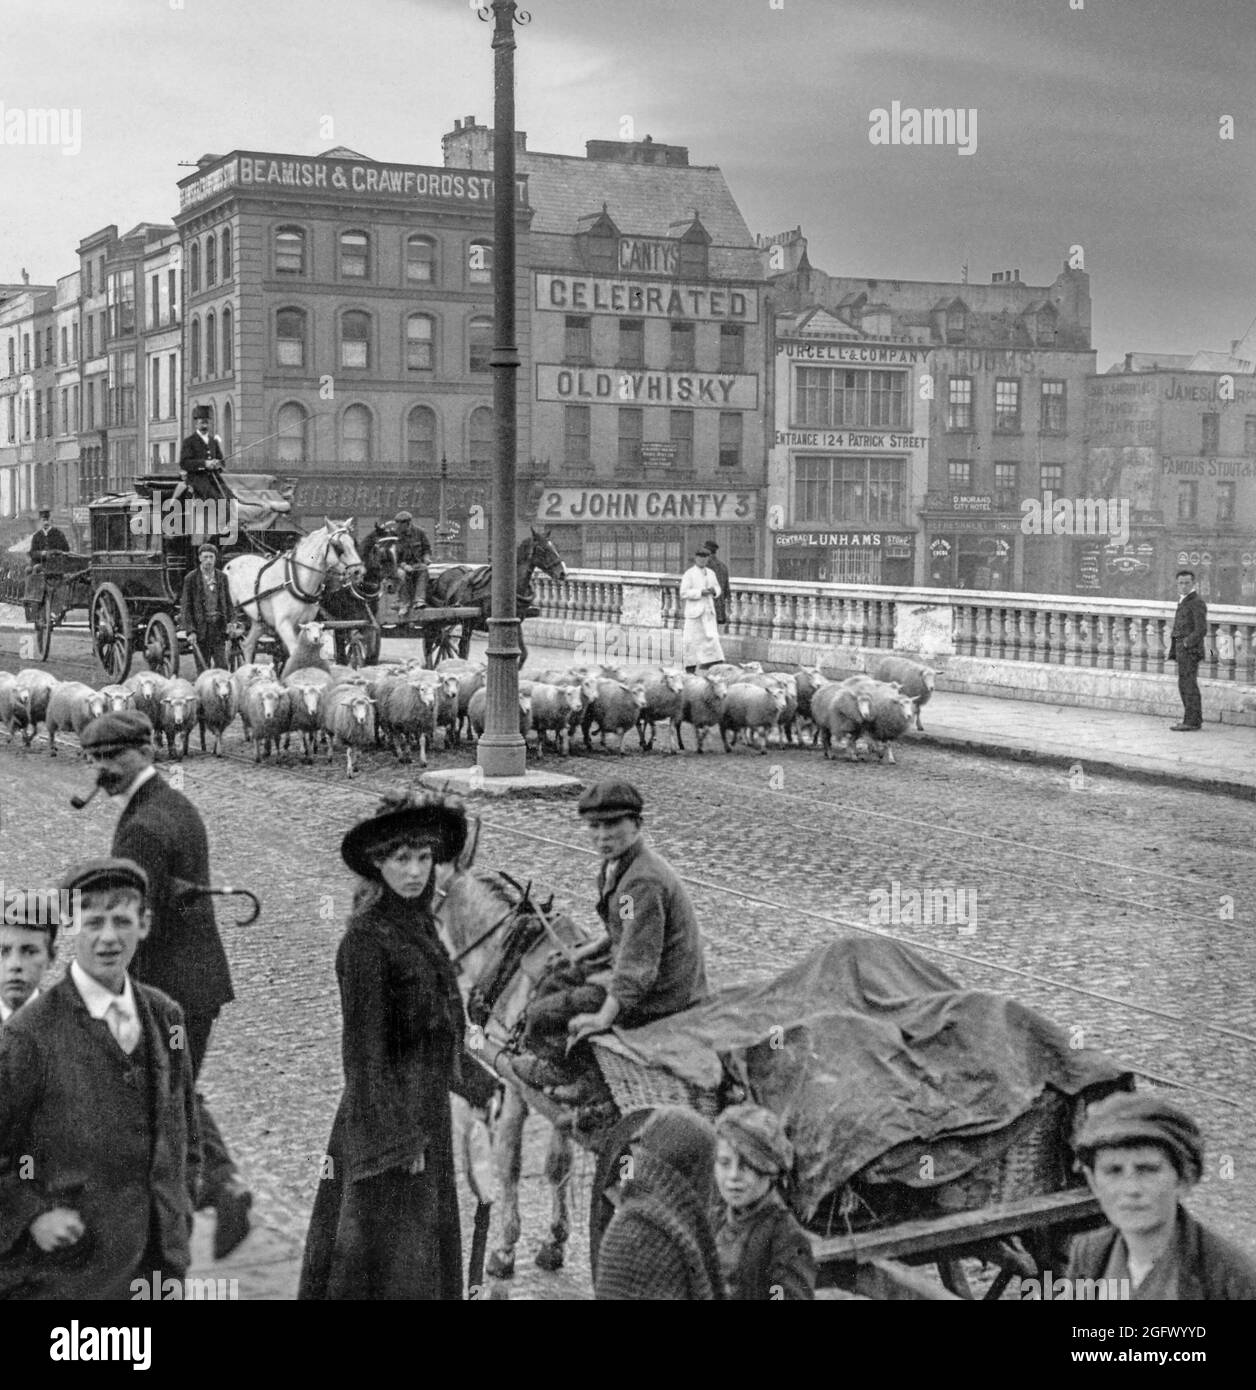 An early 20th century view of a stage coach held up by sheep on their way to market over St Patrick's Bridge in Cork City, Ireland. The first bridge, completed in 1789 and incorporating a portcullis to regulate ship traffic underneath the bridge was destroyed by a  severe flood in 1853. A temporary timber bridge, was put in place and the present bridge opened in 1861, remains one of the best-known landmarks in Cork. Stock Photo